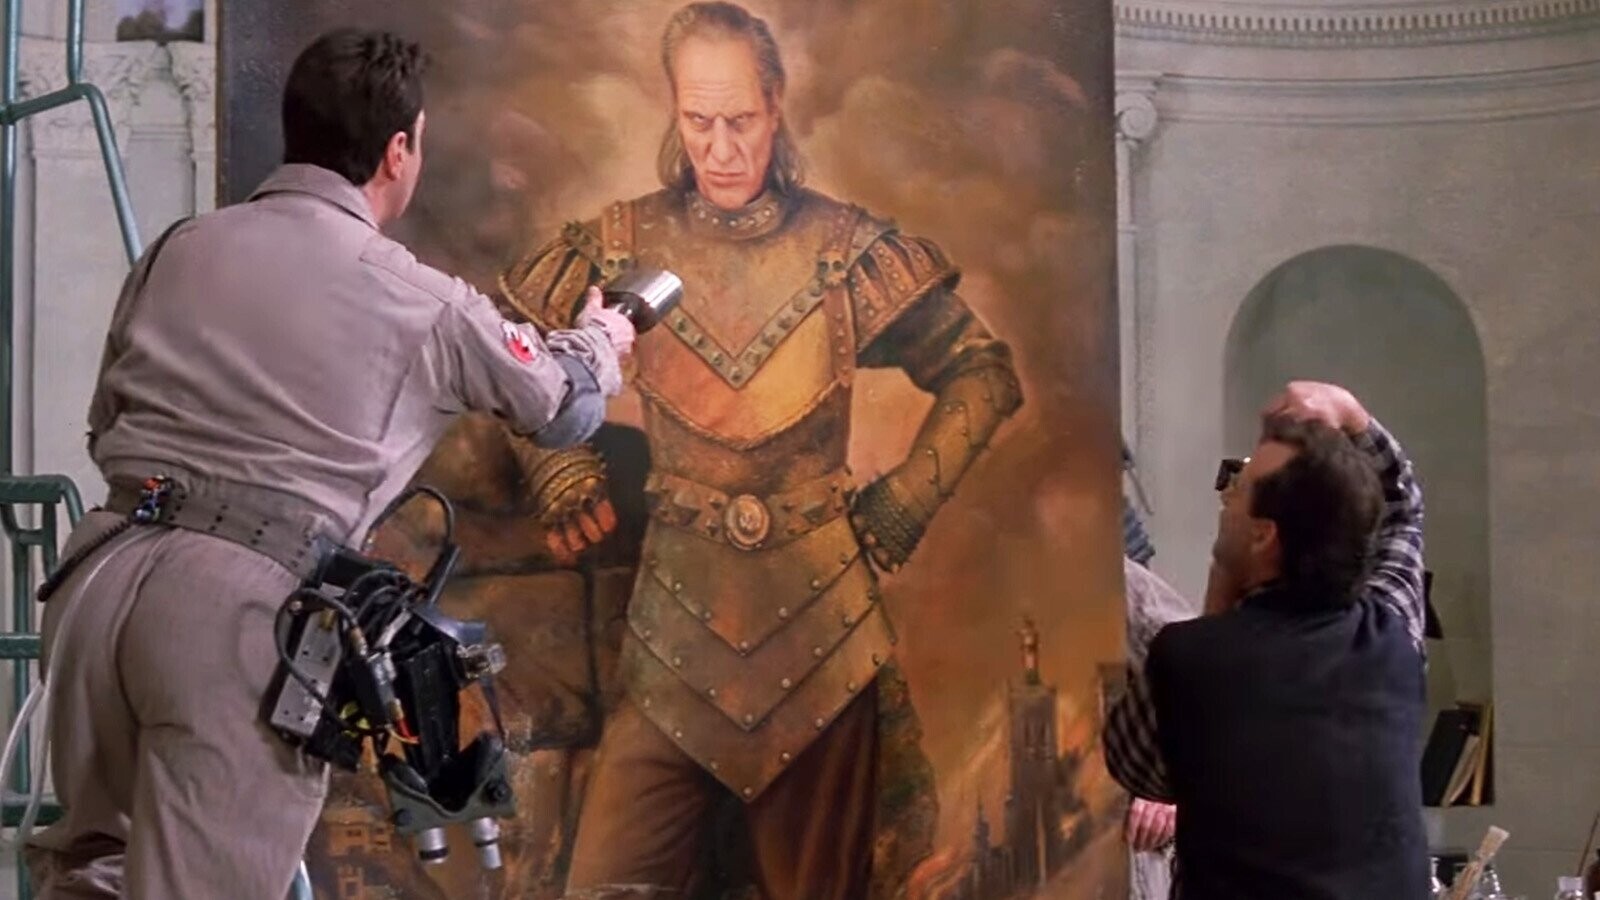 People Are Comparing the King Charles Portrait to the Cursed ‘Ghostbusters’ Painting